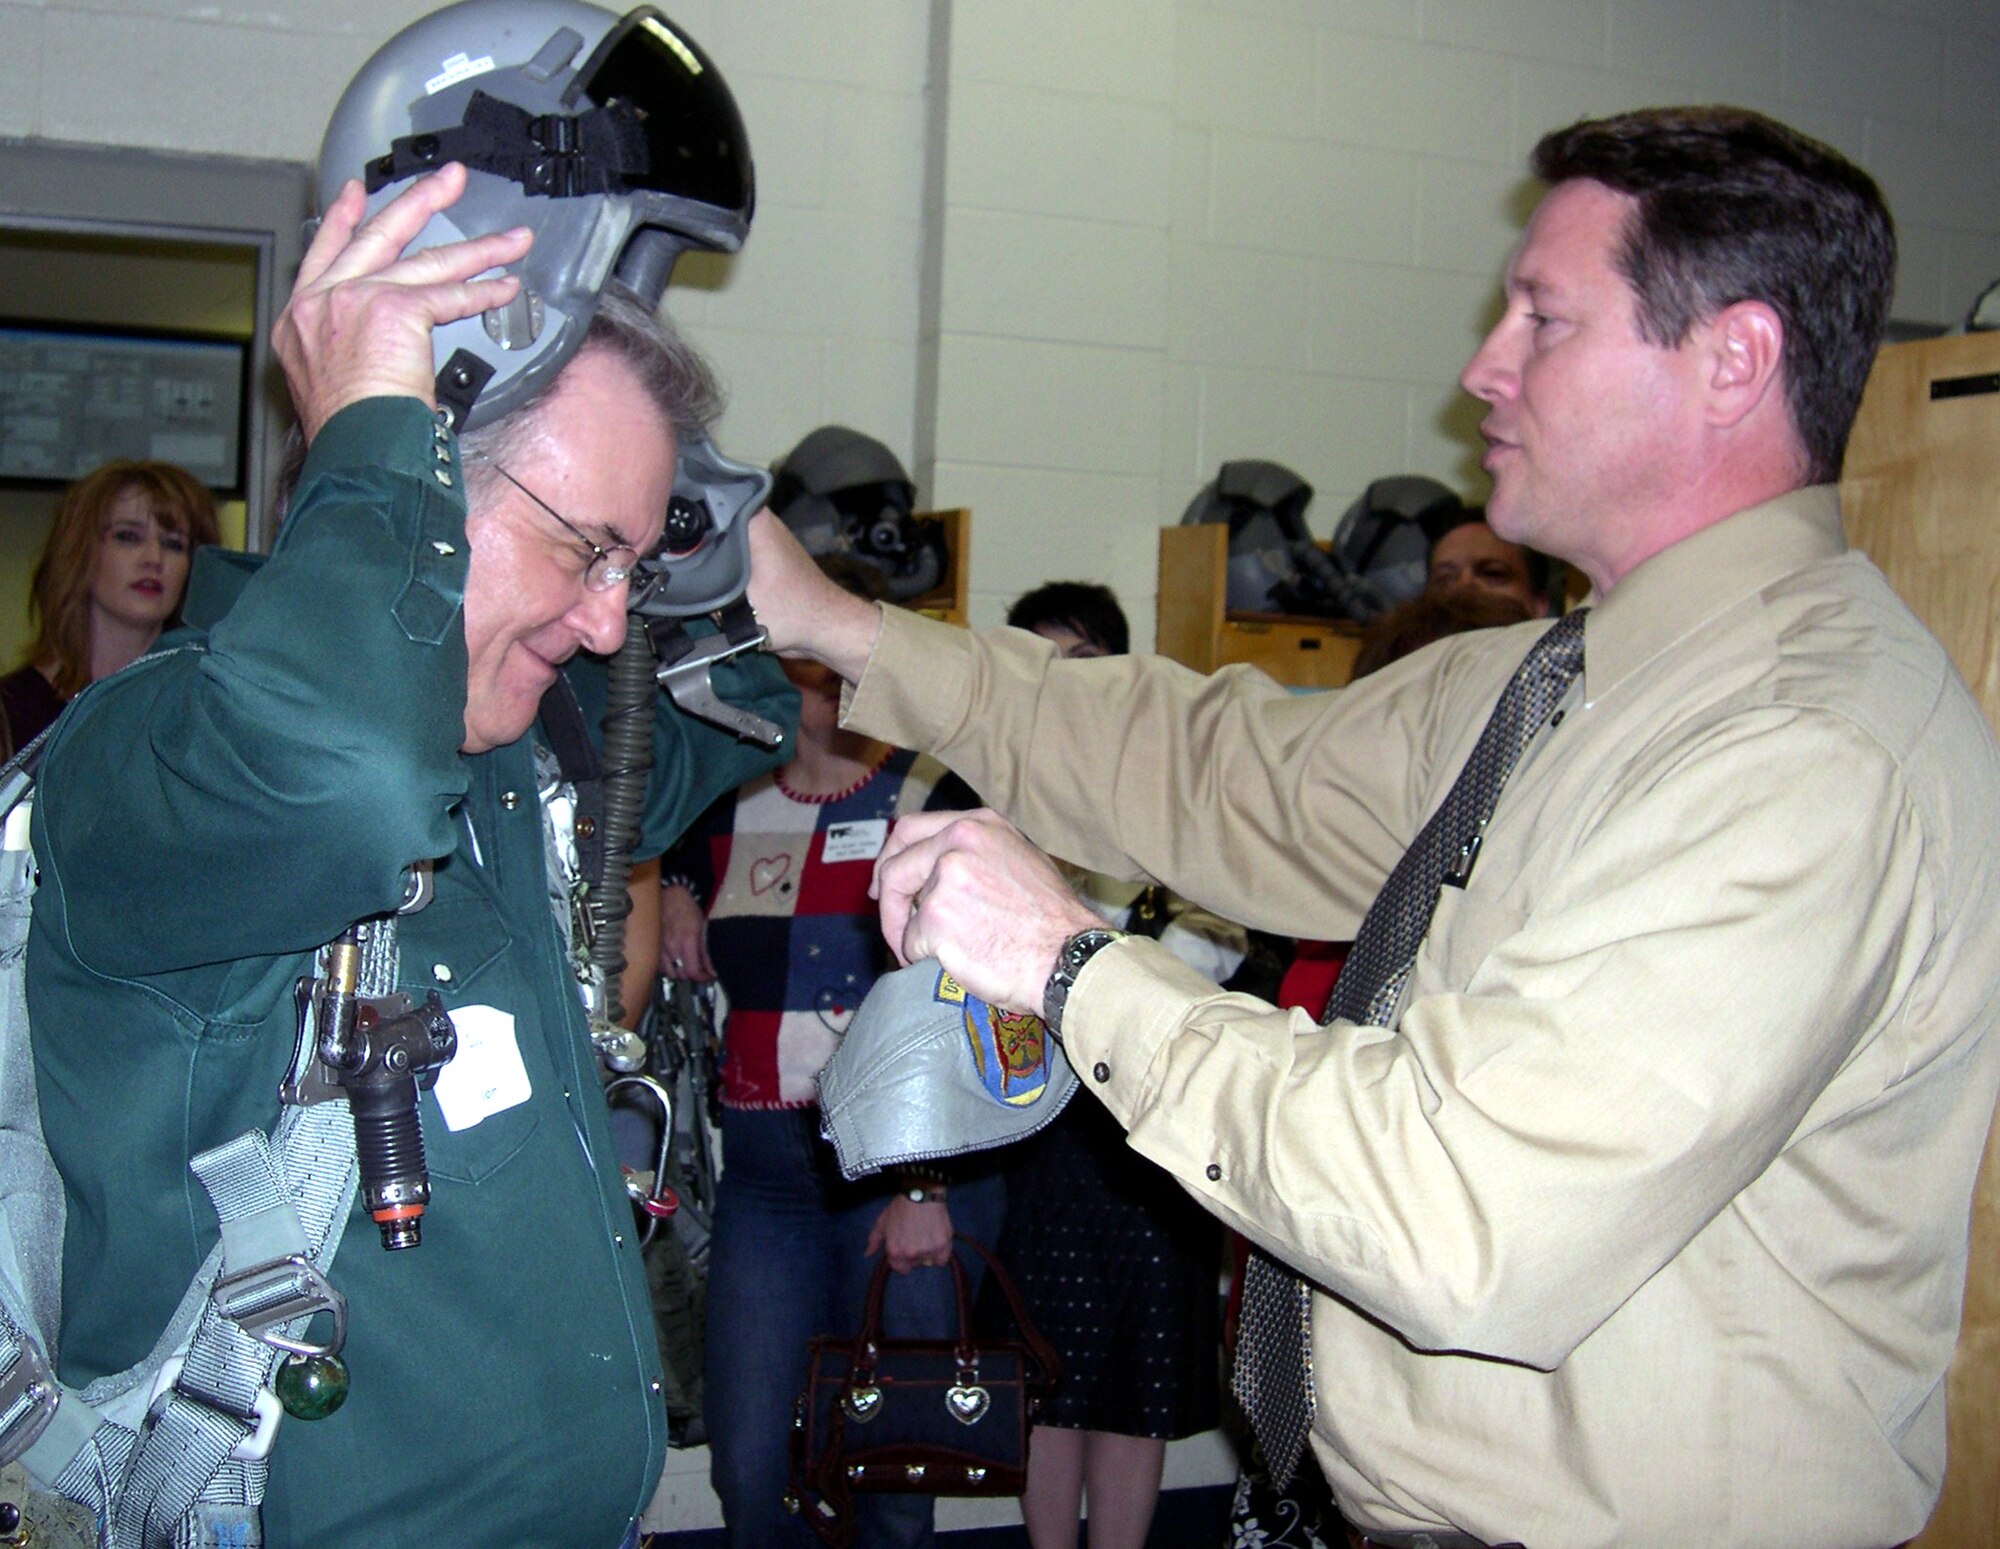 R.C. Taylor, left, a member of Leadership Wichita Falls Class of 2007, gets help donning life support equipment Feb. 20 from Jeff Roach, deputy director of the 80th Operations Group training section. Mr. Taylor was one of several area residents who are part of the 13-week program that develops future community leaders. (U.S. Air Force photo/Debi Smith)